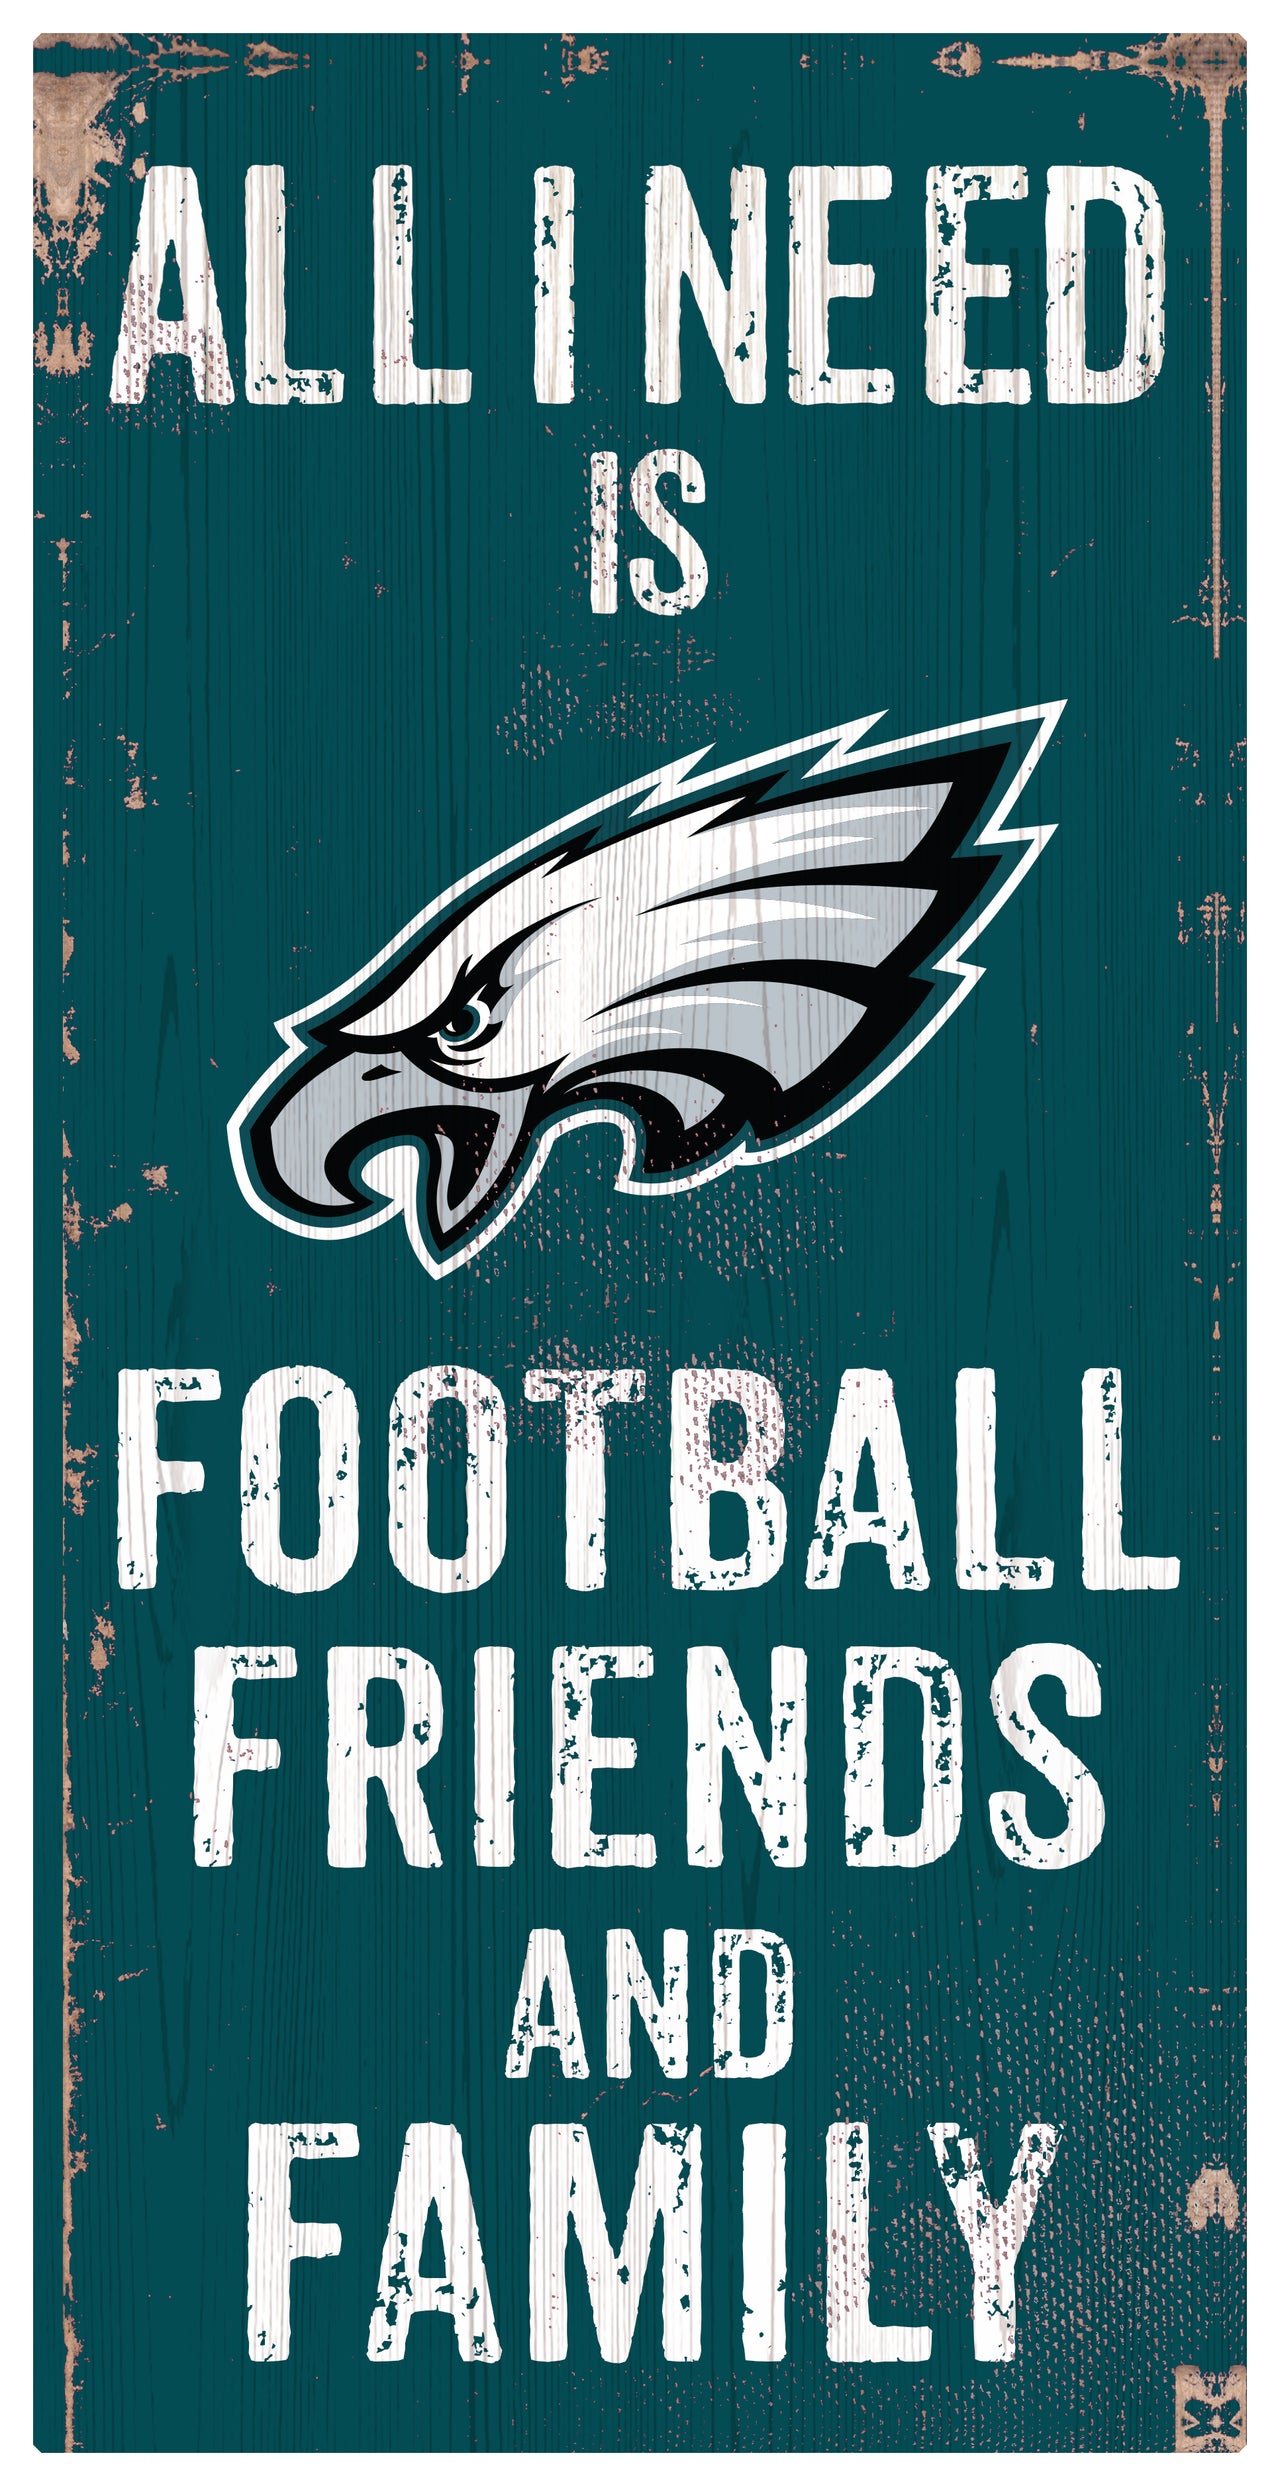 Philadelphia Eagles Father's Day Coloring 6 x 12 Wood Sign - Dynasty  Sports & Framing